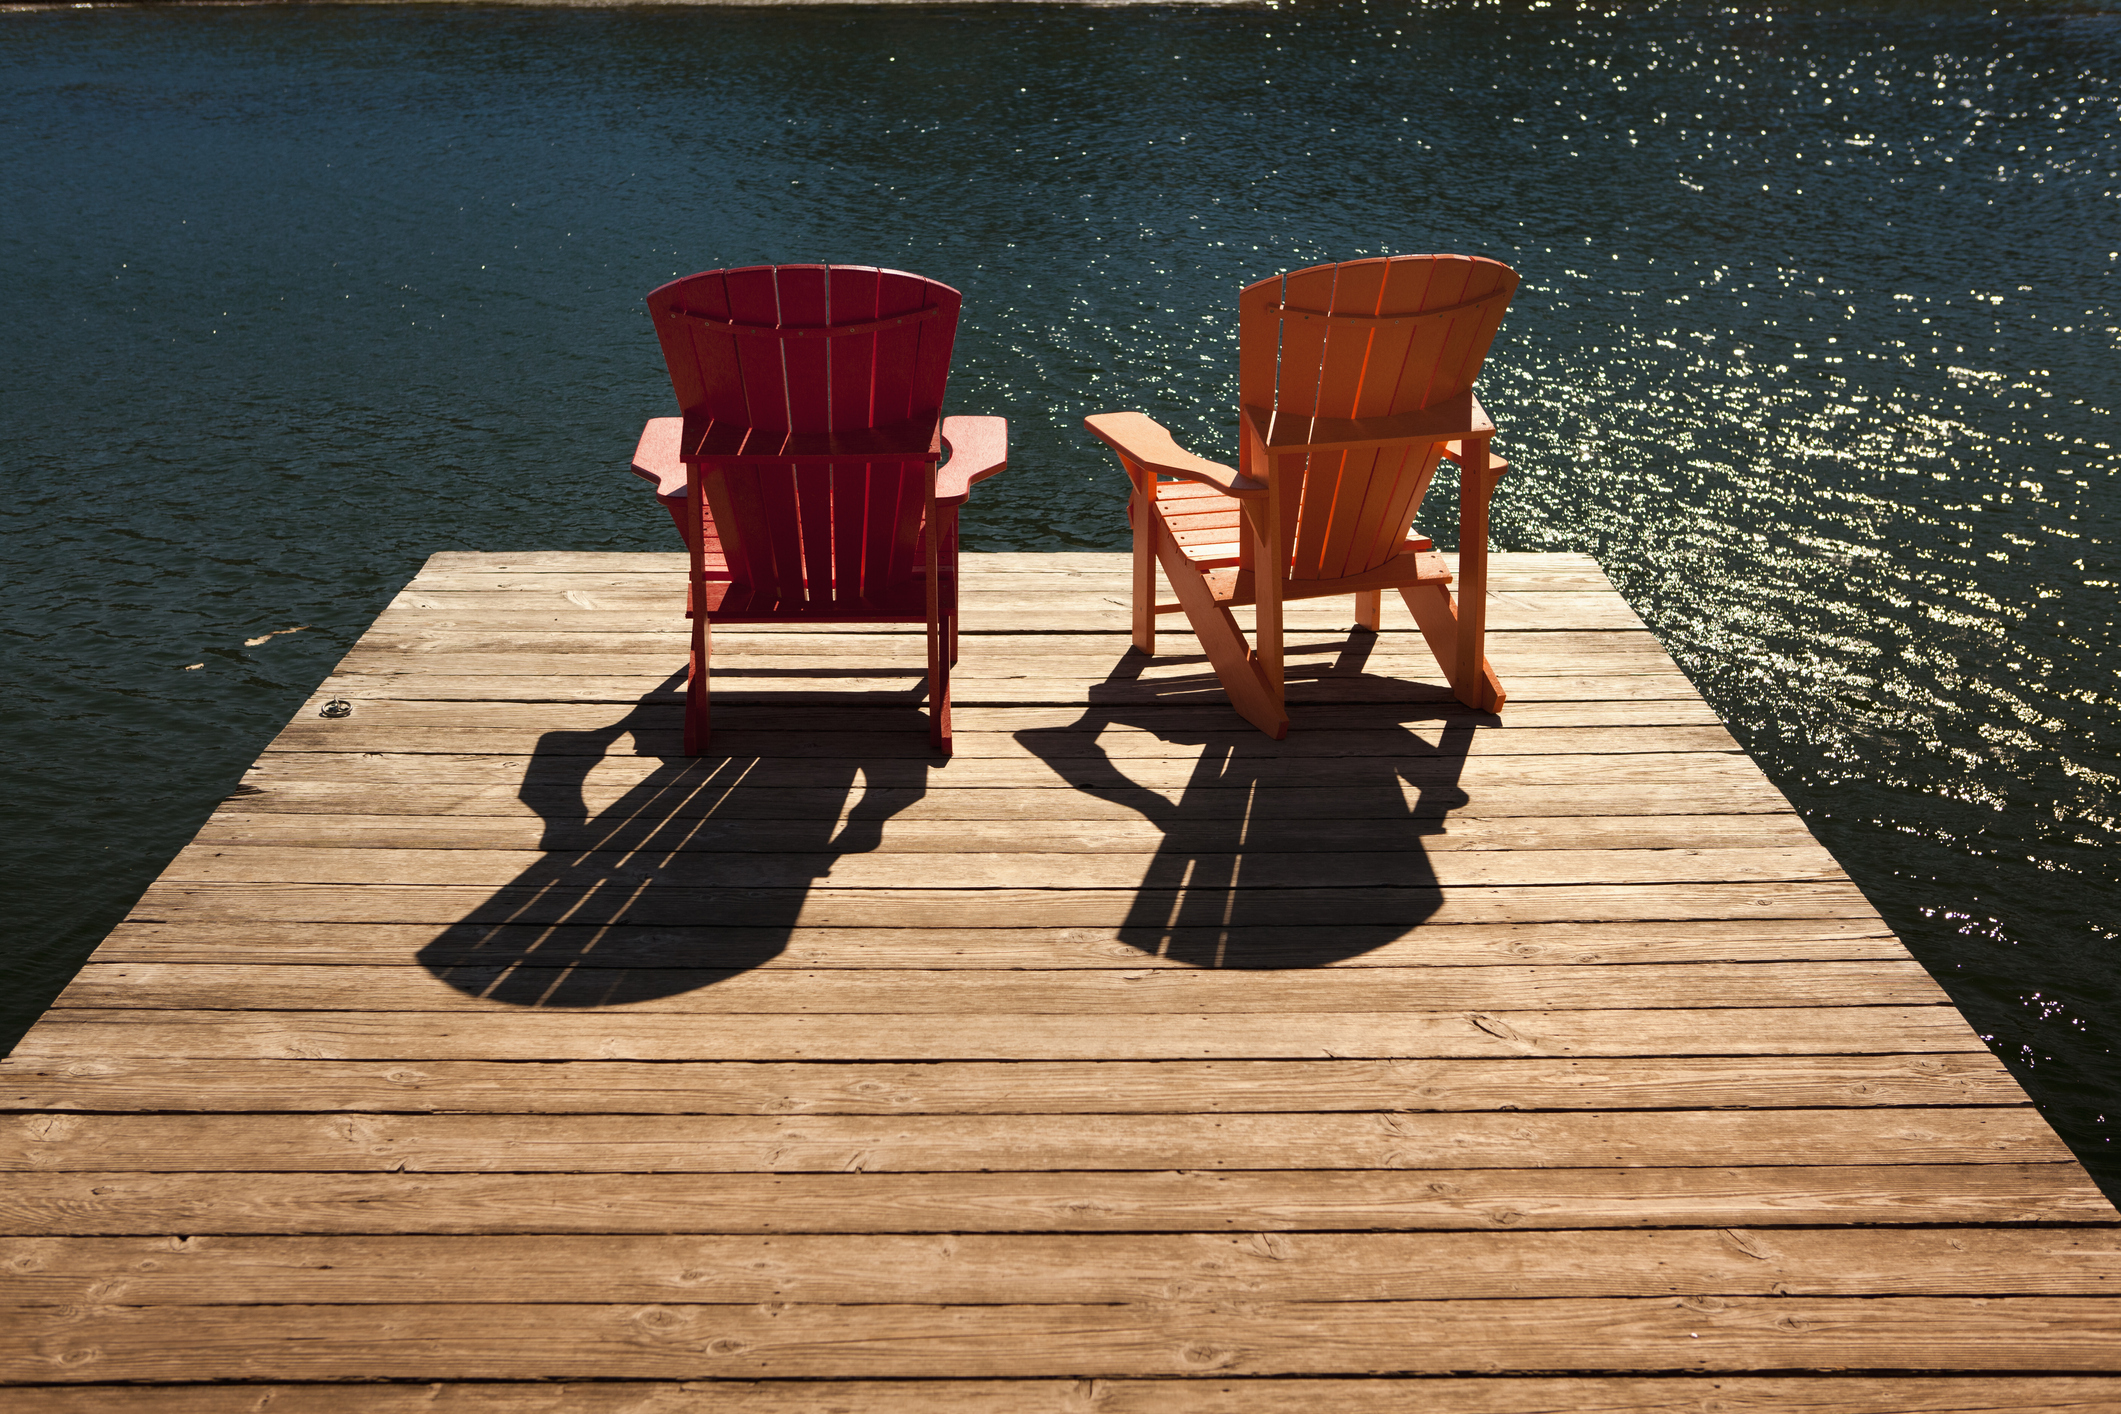 Dock on lake, with chairs